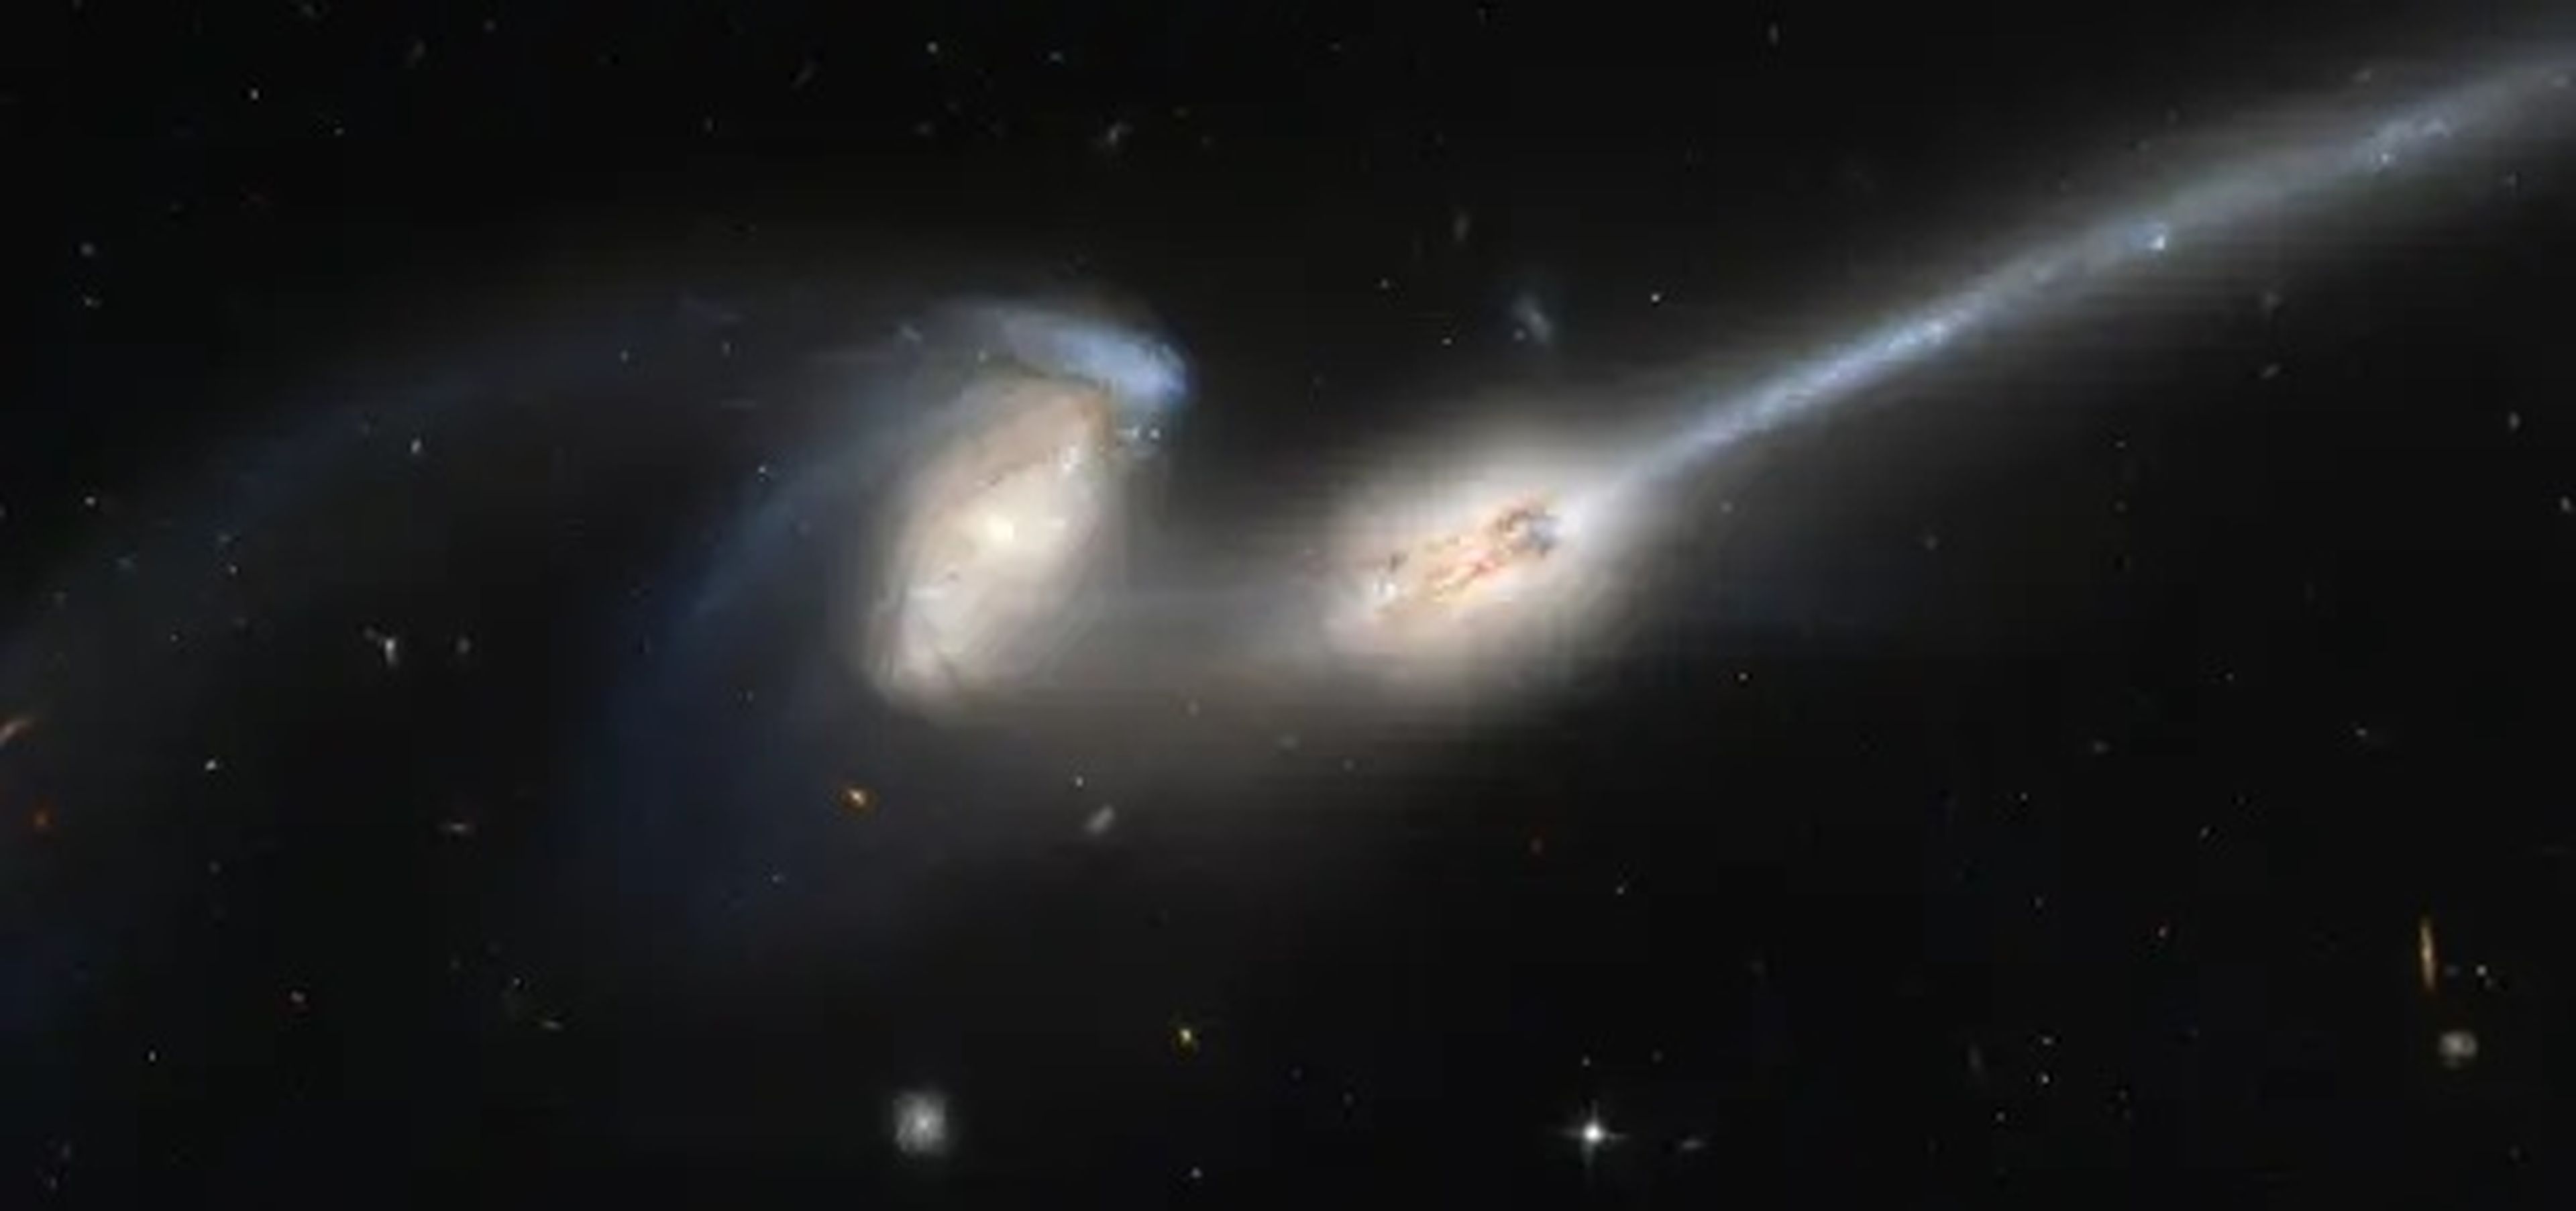 Hubble Space Telescope captured a galaxy collision known as "The Mice" because of the long tails of stars and gas emanating from each galaxy.